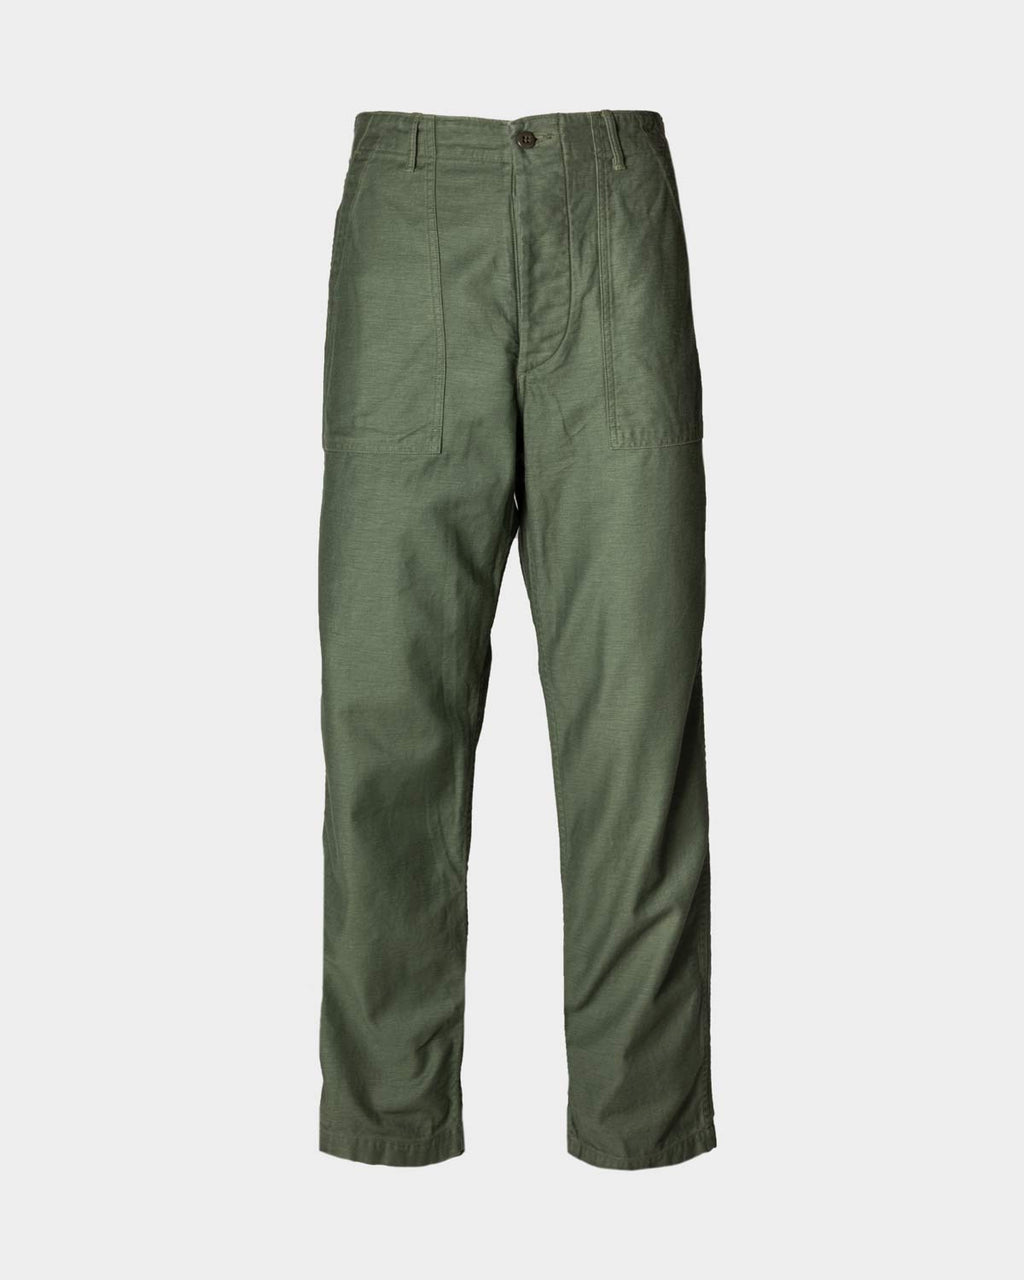 OrSlow US Army Regular Fit Fatigue Pants - Green Reverse Cotton